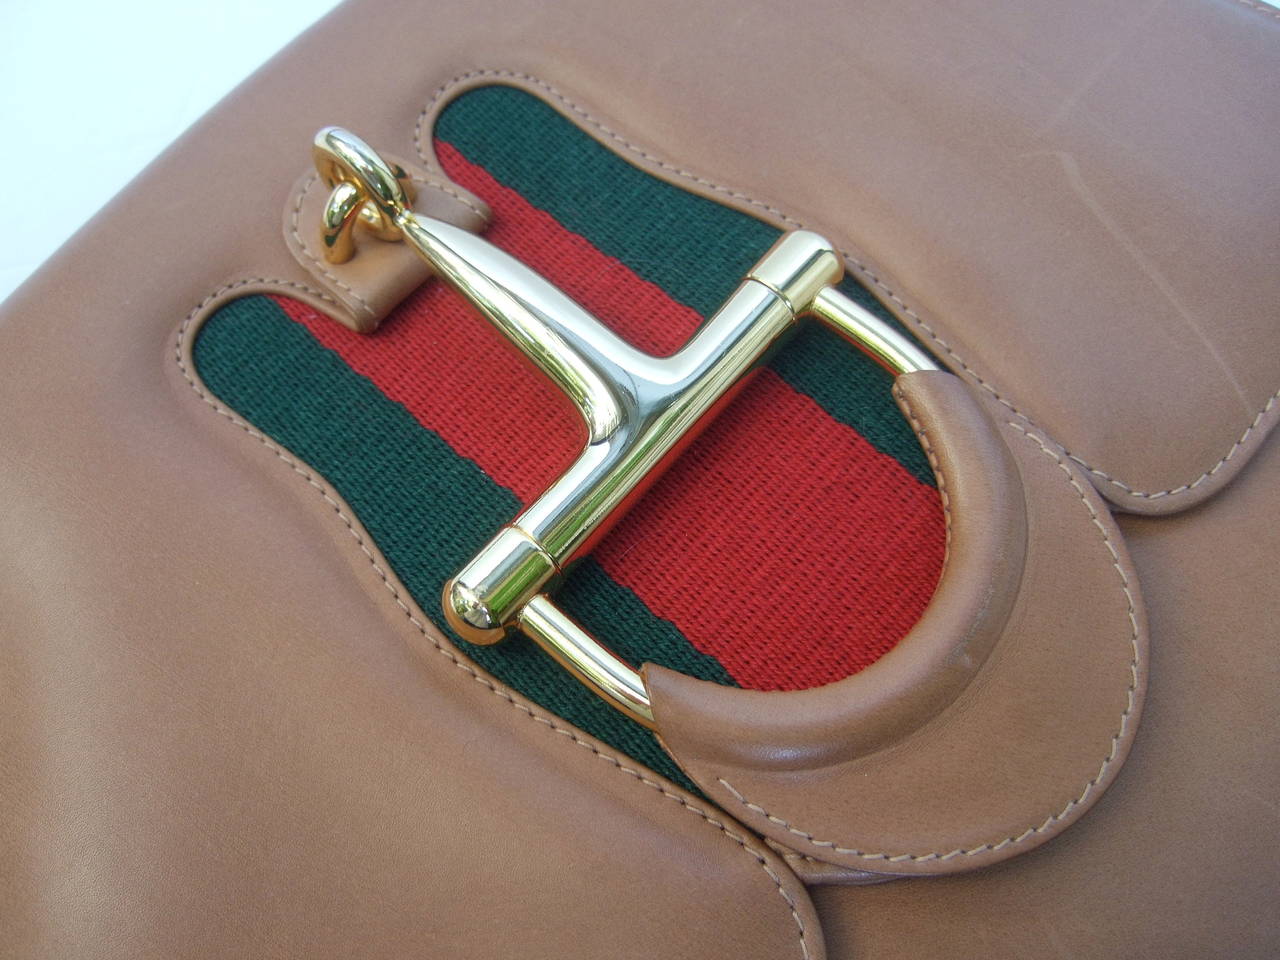 GUCCI Italy Caramel brown leather horse bit clasp shoulder bag c 1970s
The rare Gucci handbag is covered with supple light brown leather
The sleek gilt metal clasp is designed in the style of an equestrian 
bridal bit with Gucci's signature red &